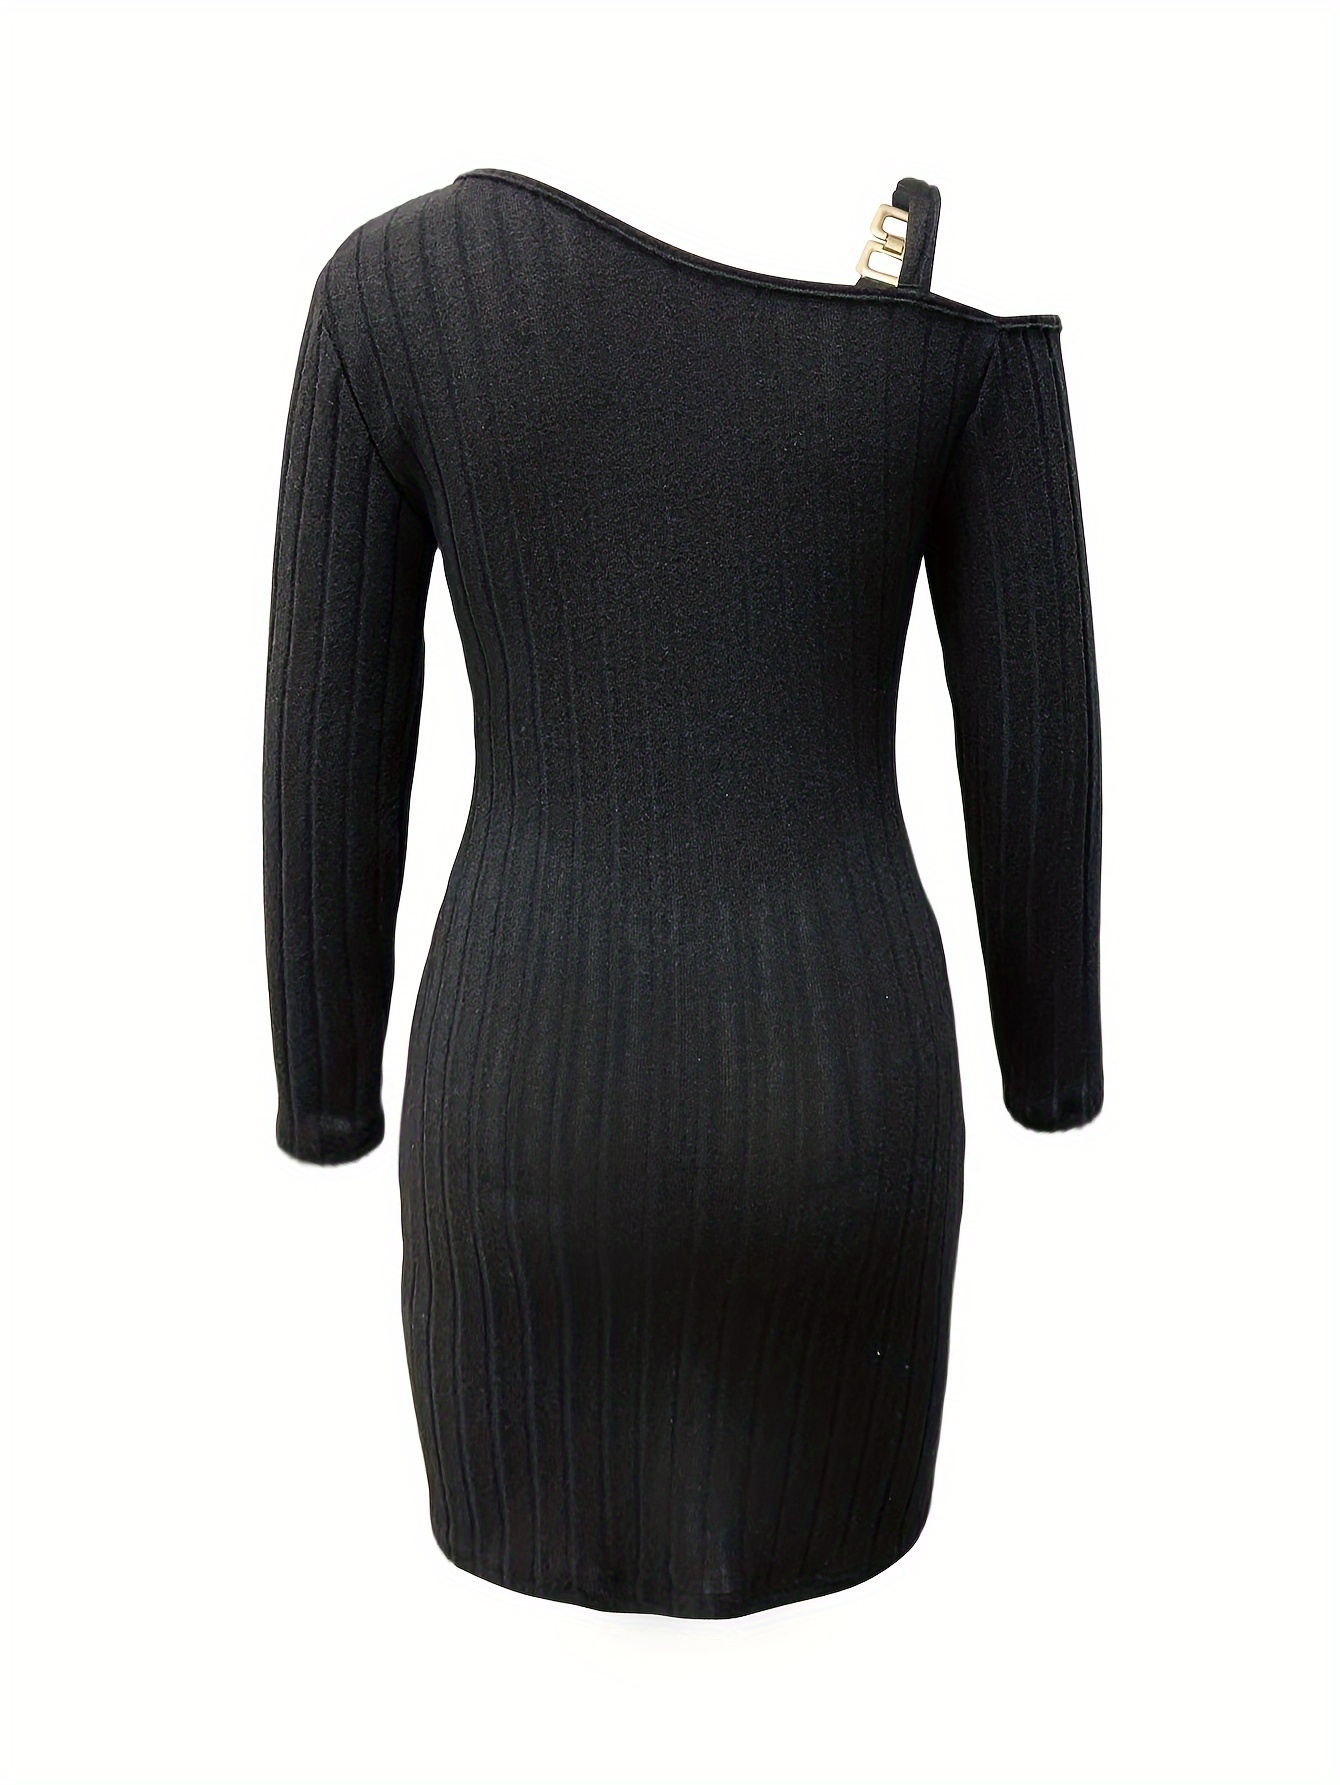 ribbed slanted shoulder dress party wear solid long sleeve mini dress womens clothing details 7